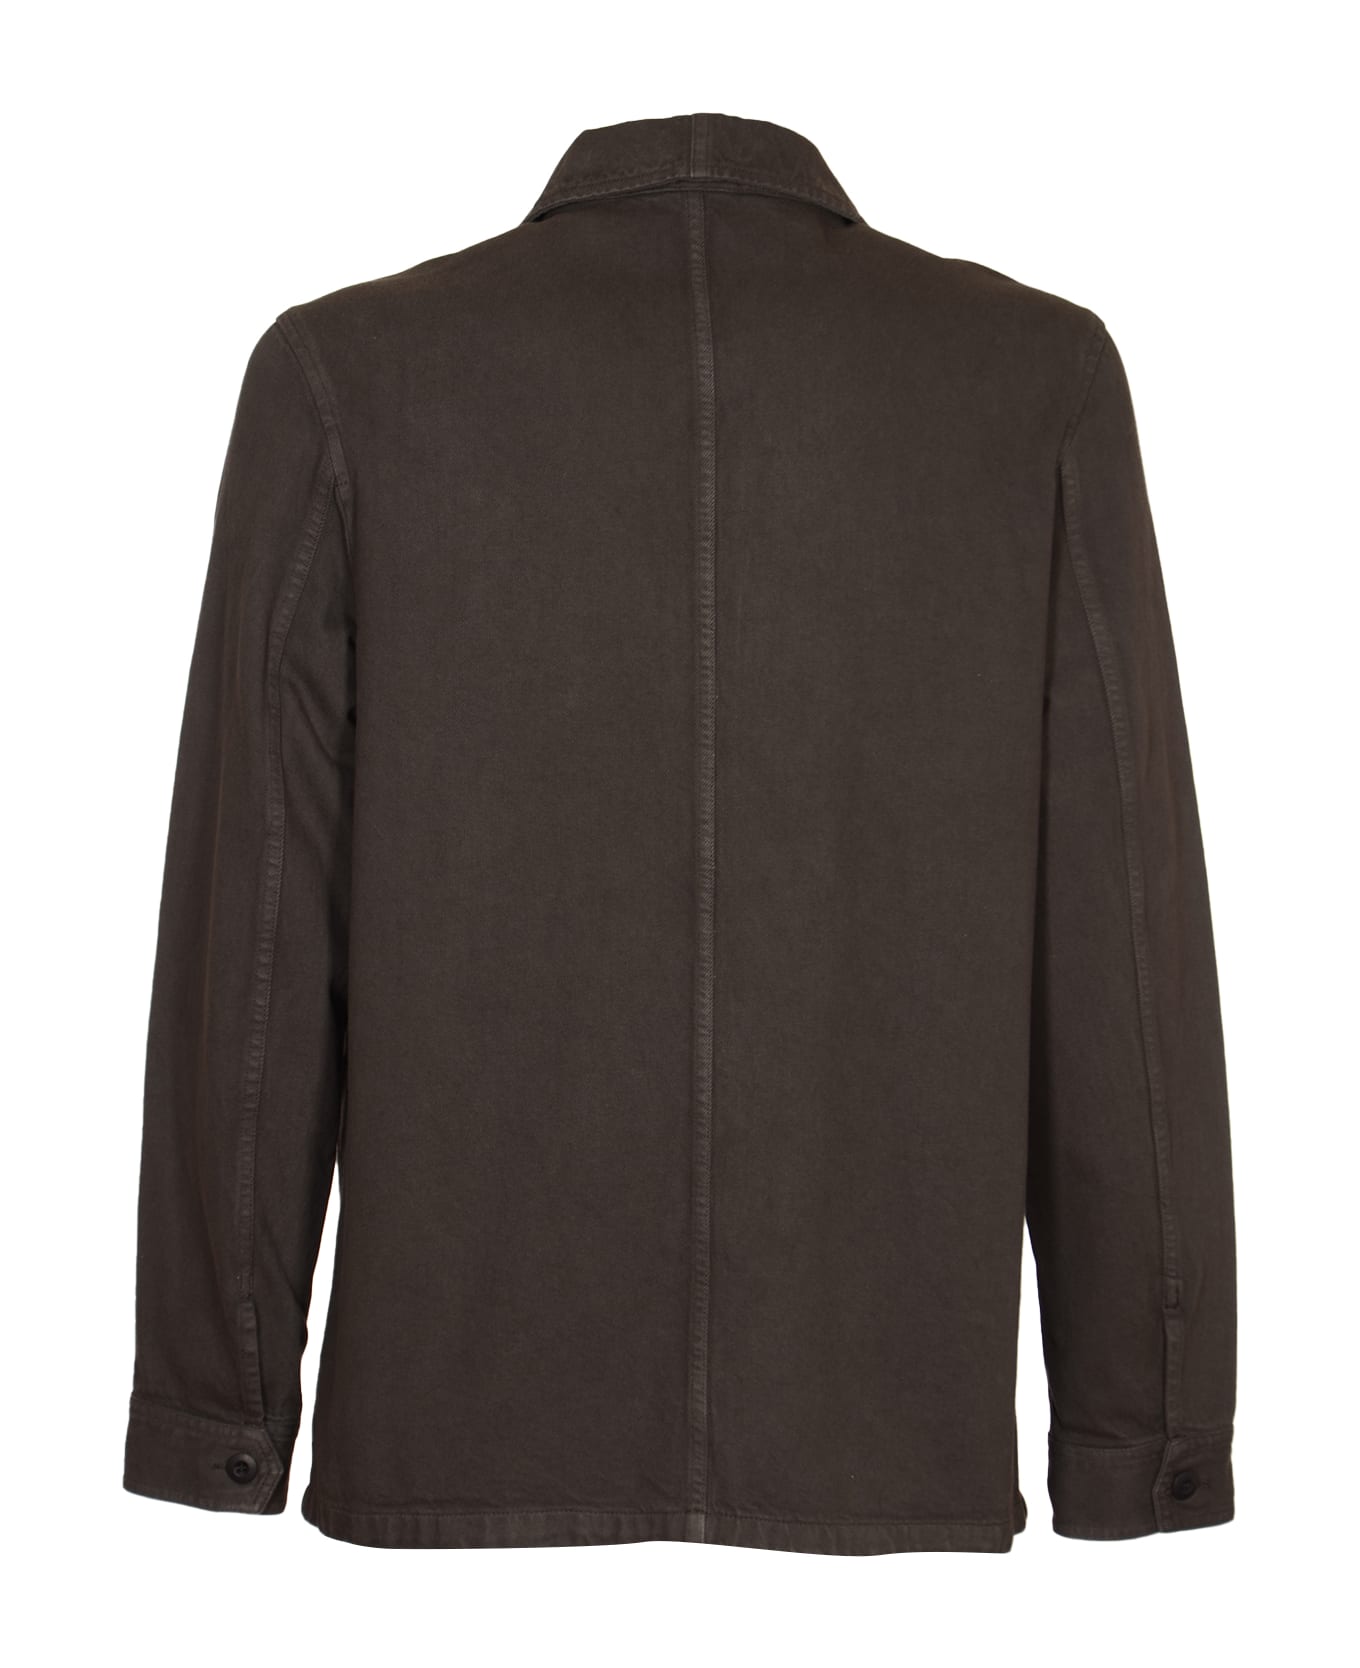 A.P.C. Connor Jacket - Anthracite